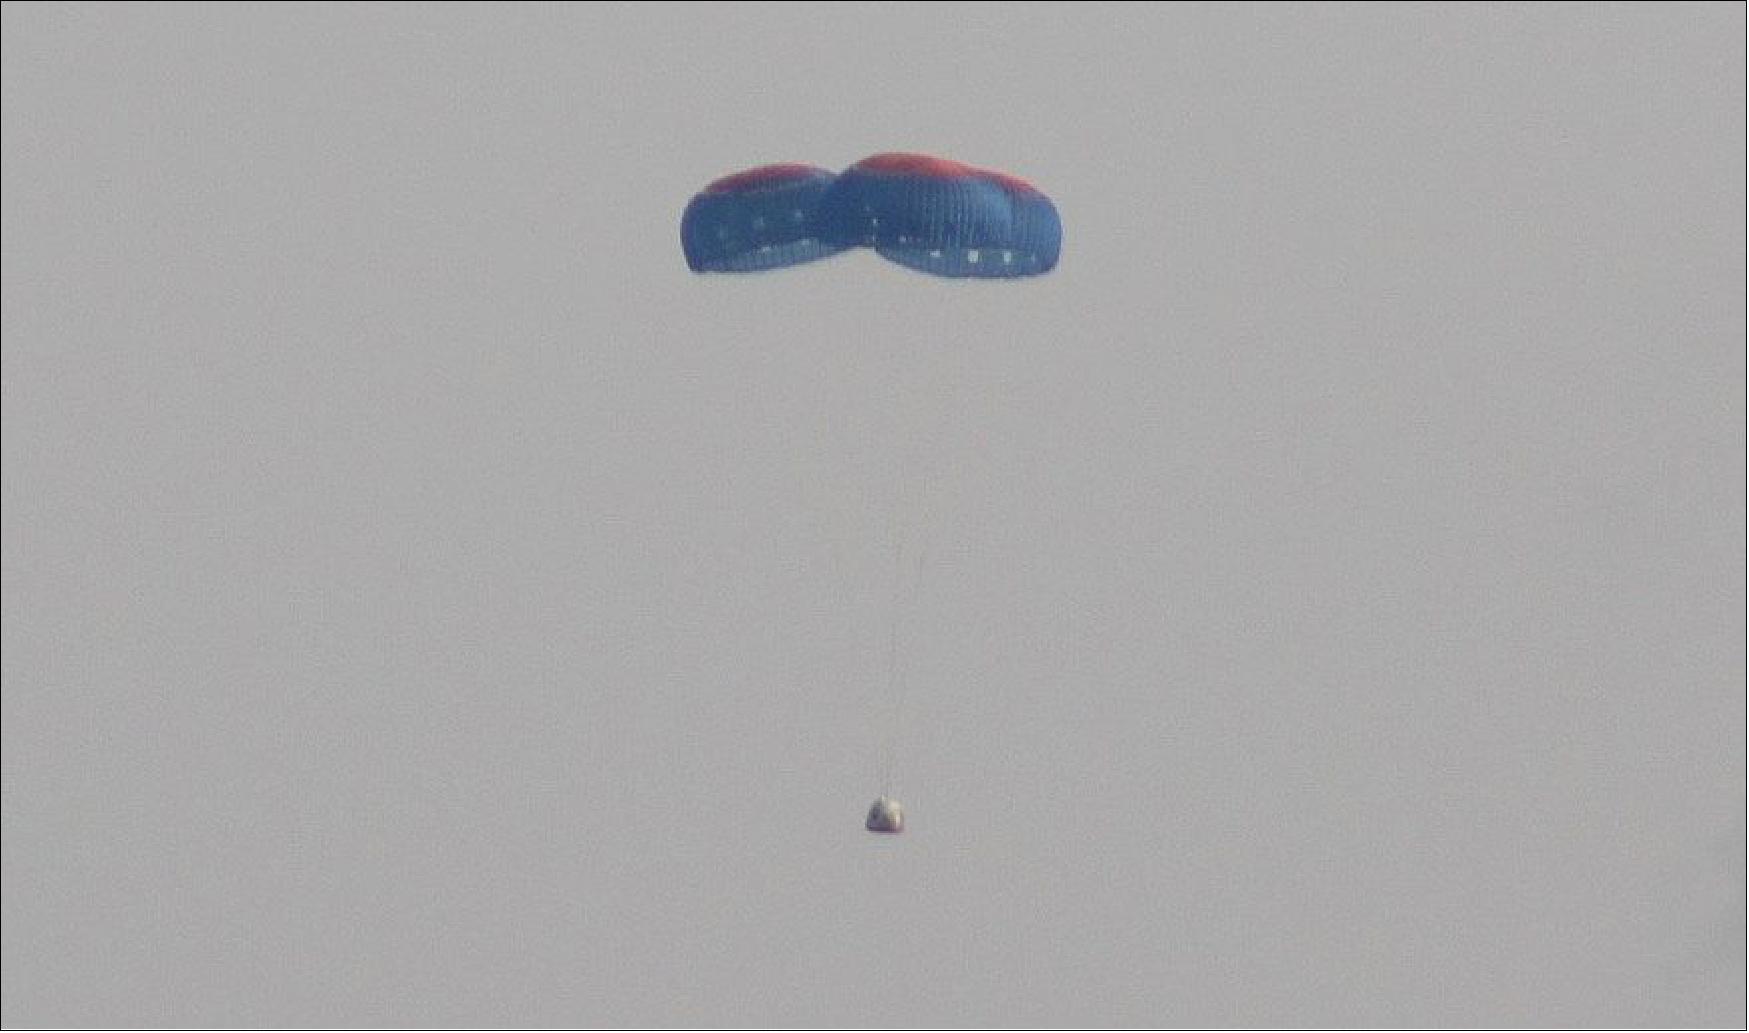 Figure 20: The New Shepard capsule descends under parachutes during its July 20 crewed flight (image credit: SpaceNews/Jeff Foust)